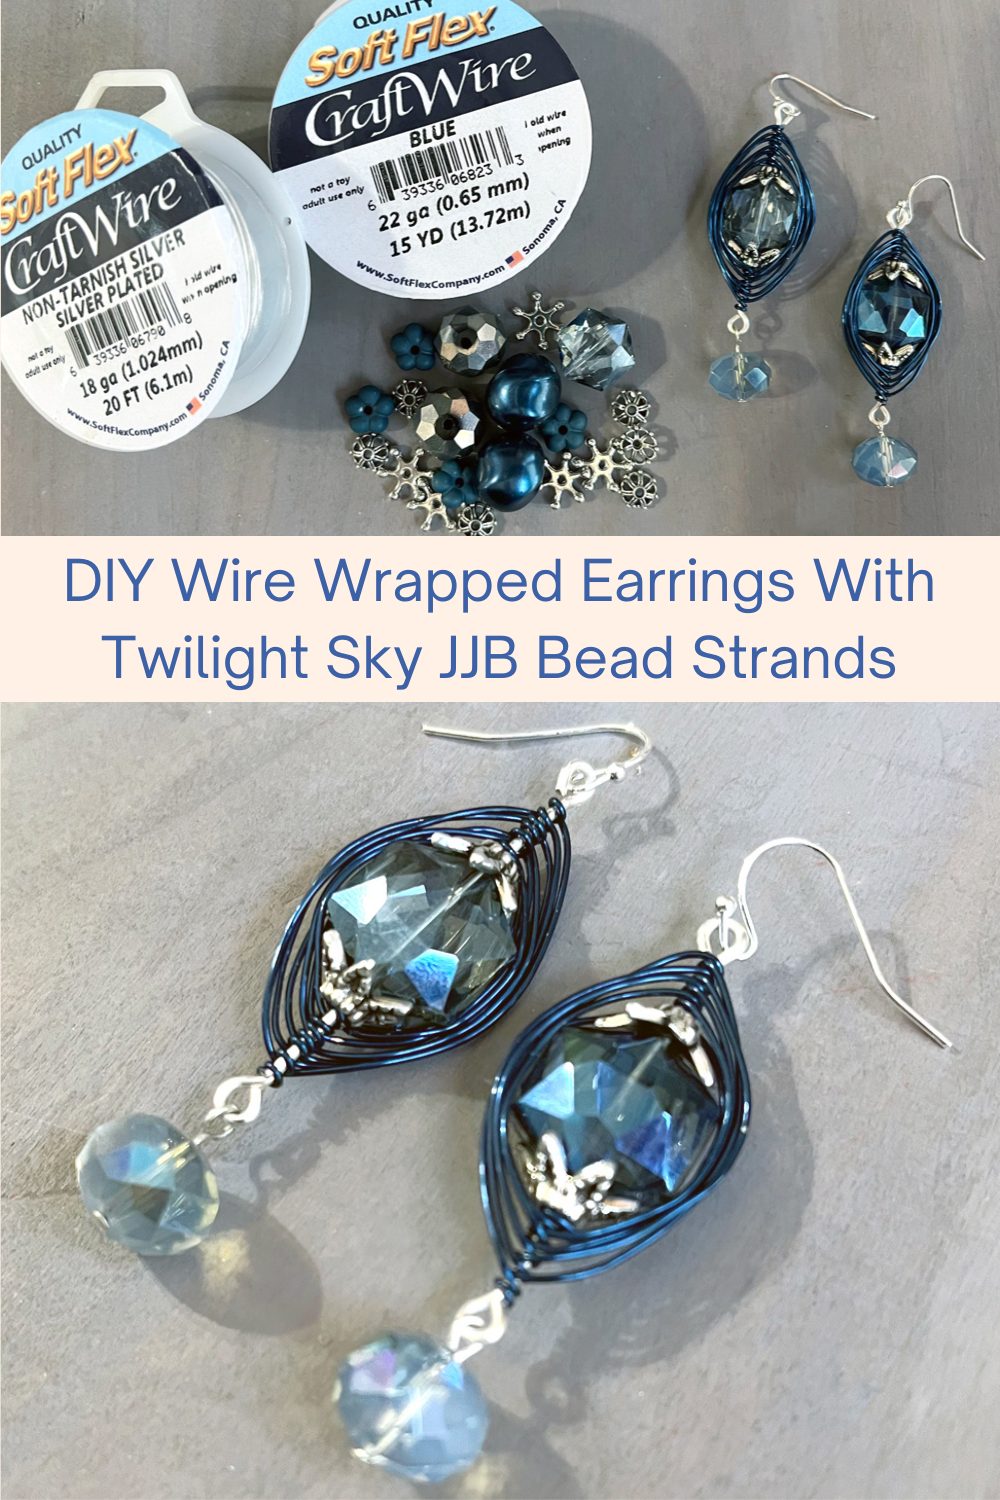 DIY Wire Wrapped Earrings With Twilight Sky JJB Bead Strands Collage